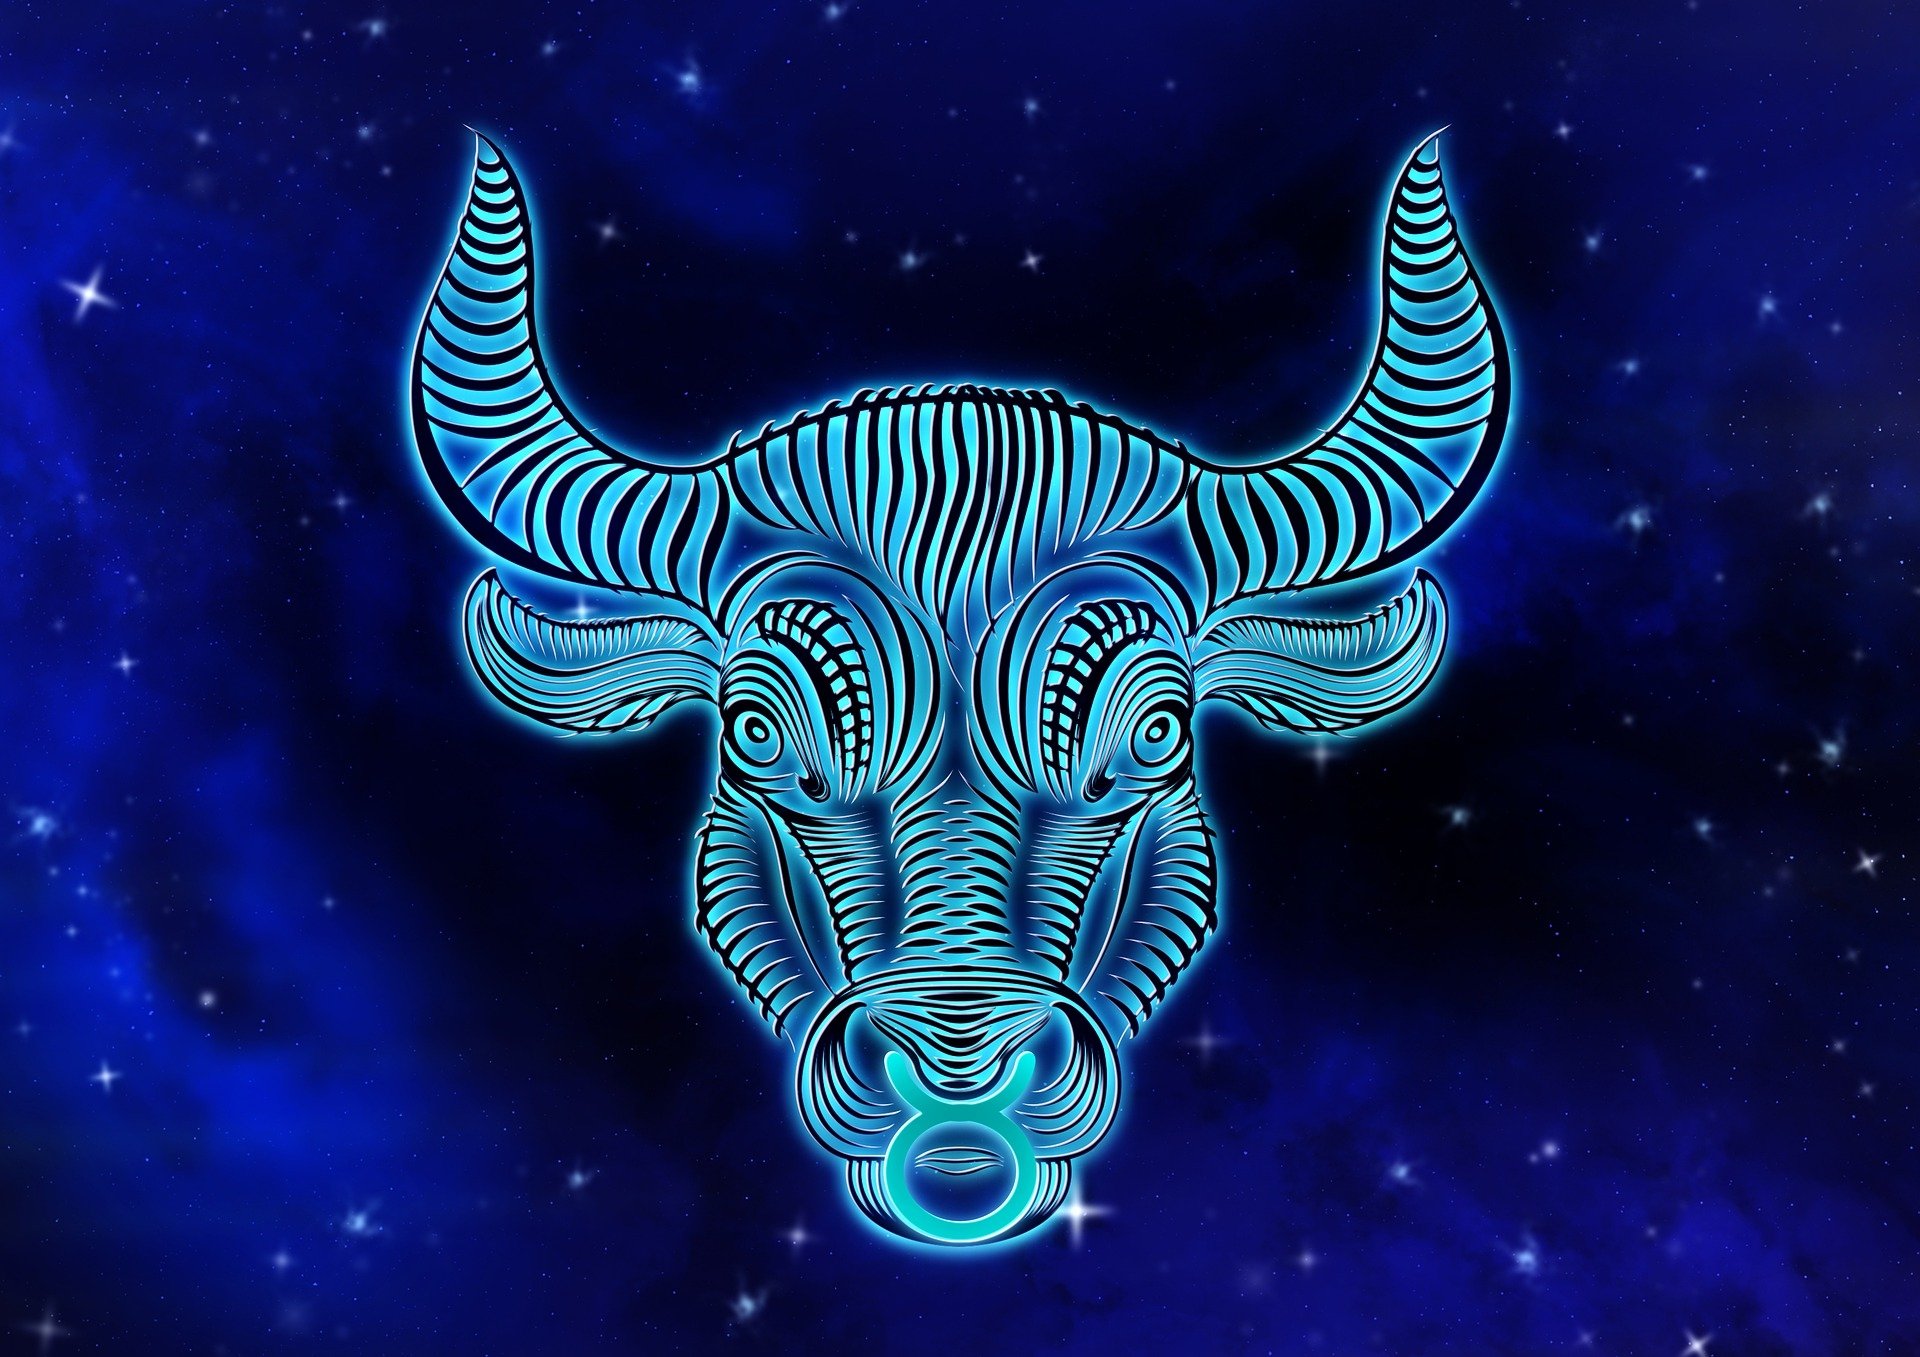 What is Taurus background?